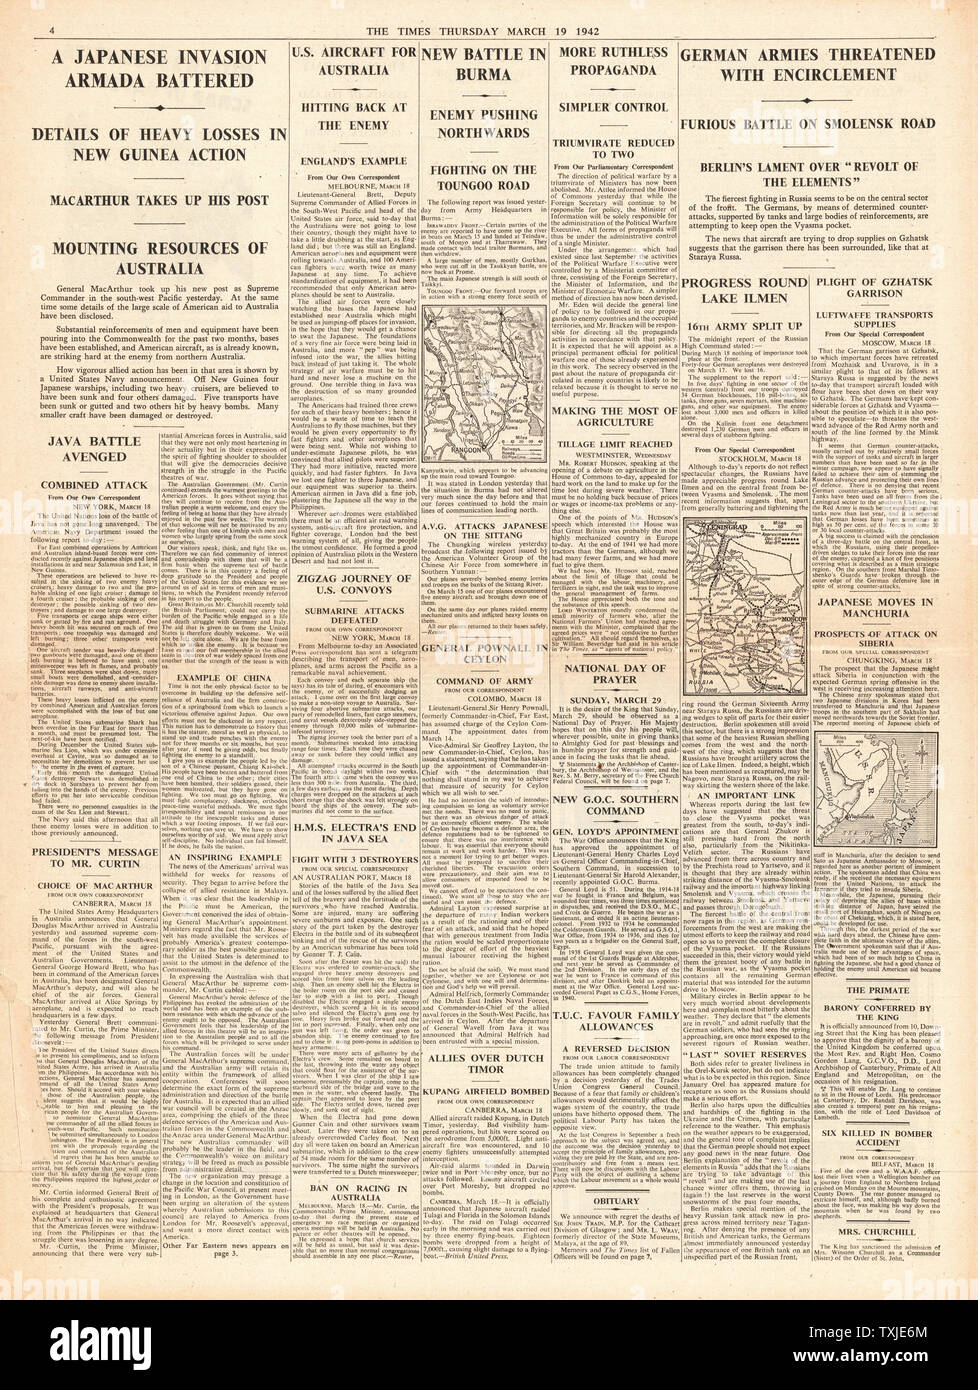 1942 page 4 The Times Japanese Invasion Fleet sunk off New Guinea by Australian and U.S. Airforces, U.S. Troops arrive in Australia and Battle for Burma Stock Photo